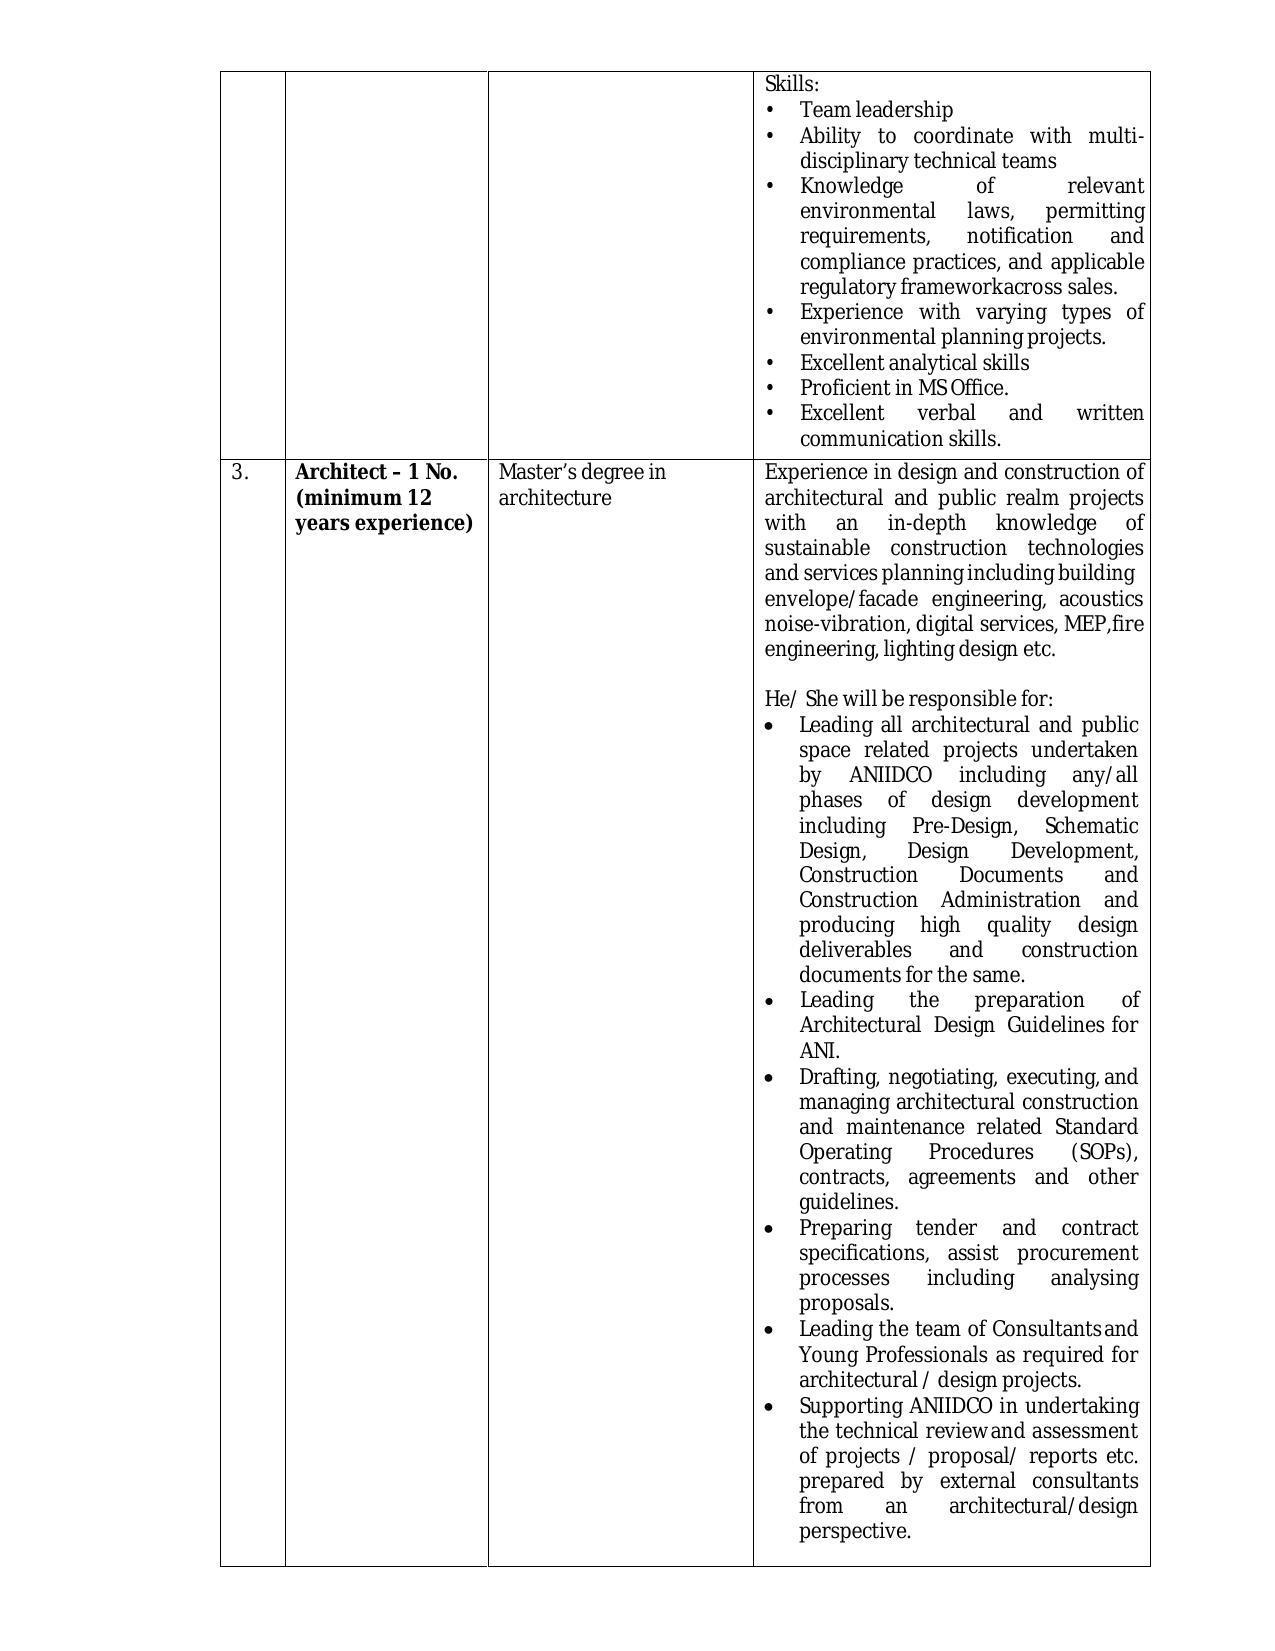 ANIIDCO Invites Application for 18 Environmental Planner, More Vacancies Recruitment 2022 - Page 10